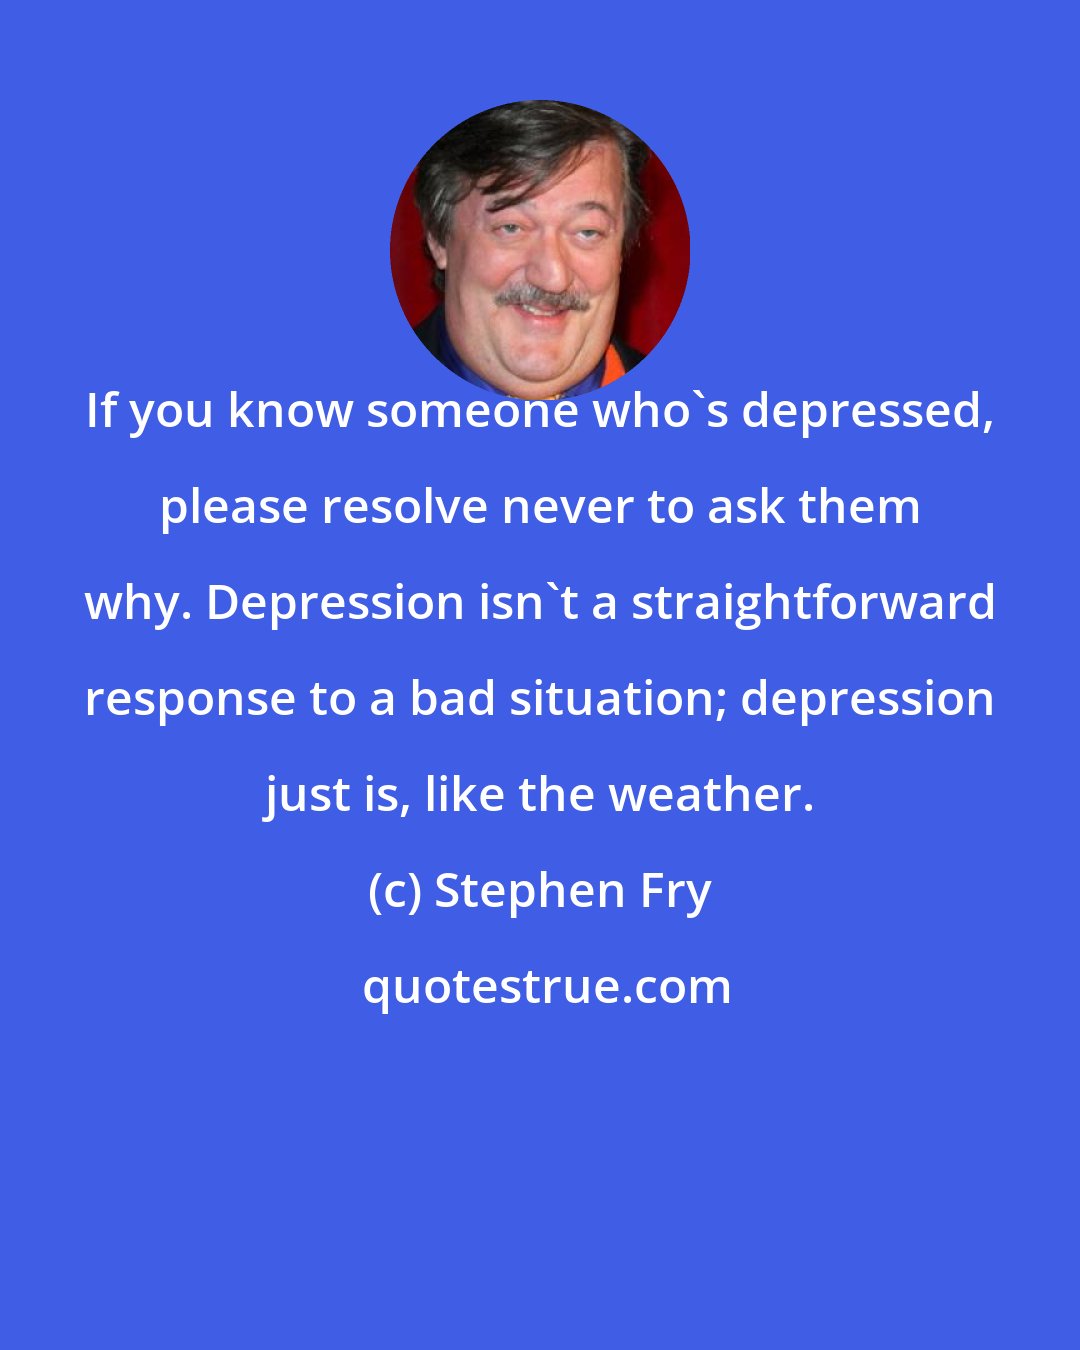 Stephen Fry: If you know someone who's depressed, please resolve never to ask them why. Depression isn't a straightforward response to a bad situation; depression just is, like the weather.